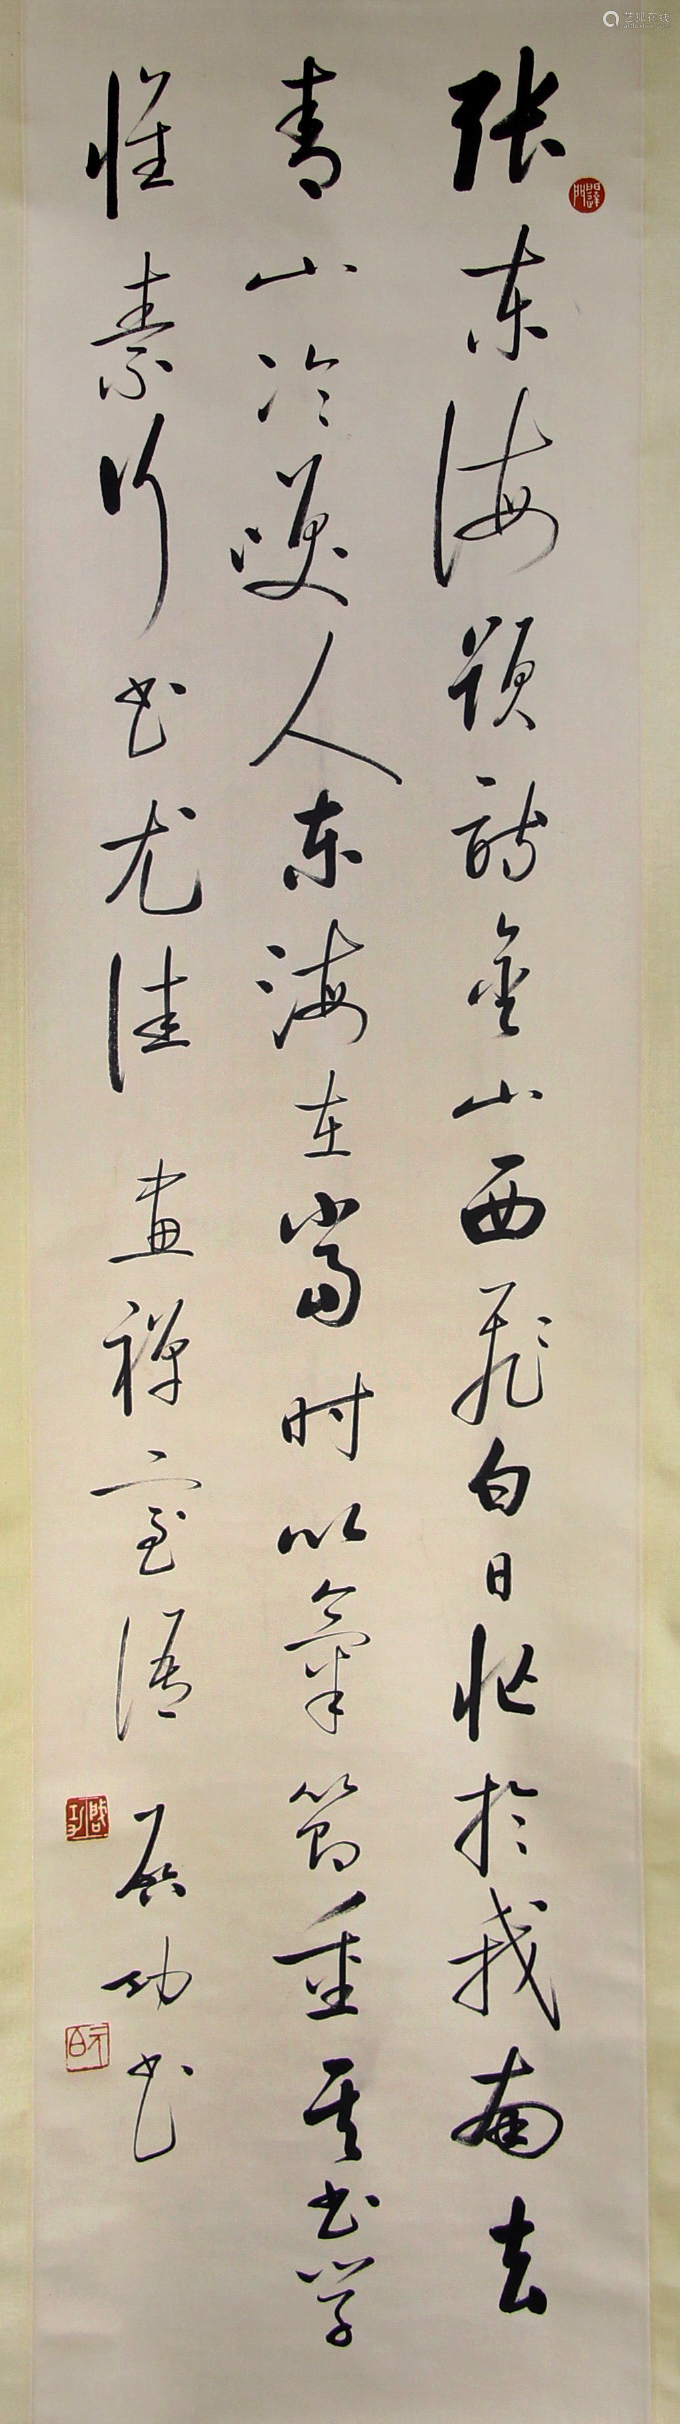 Chinese ink painting,
Qi Gong's calligraphy